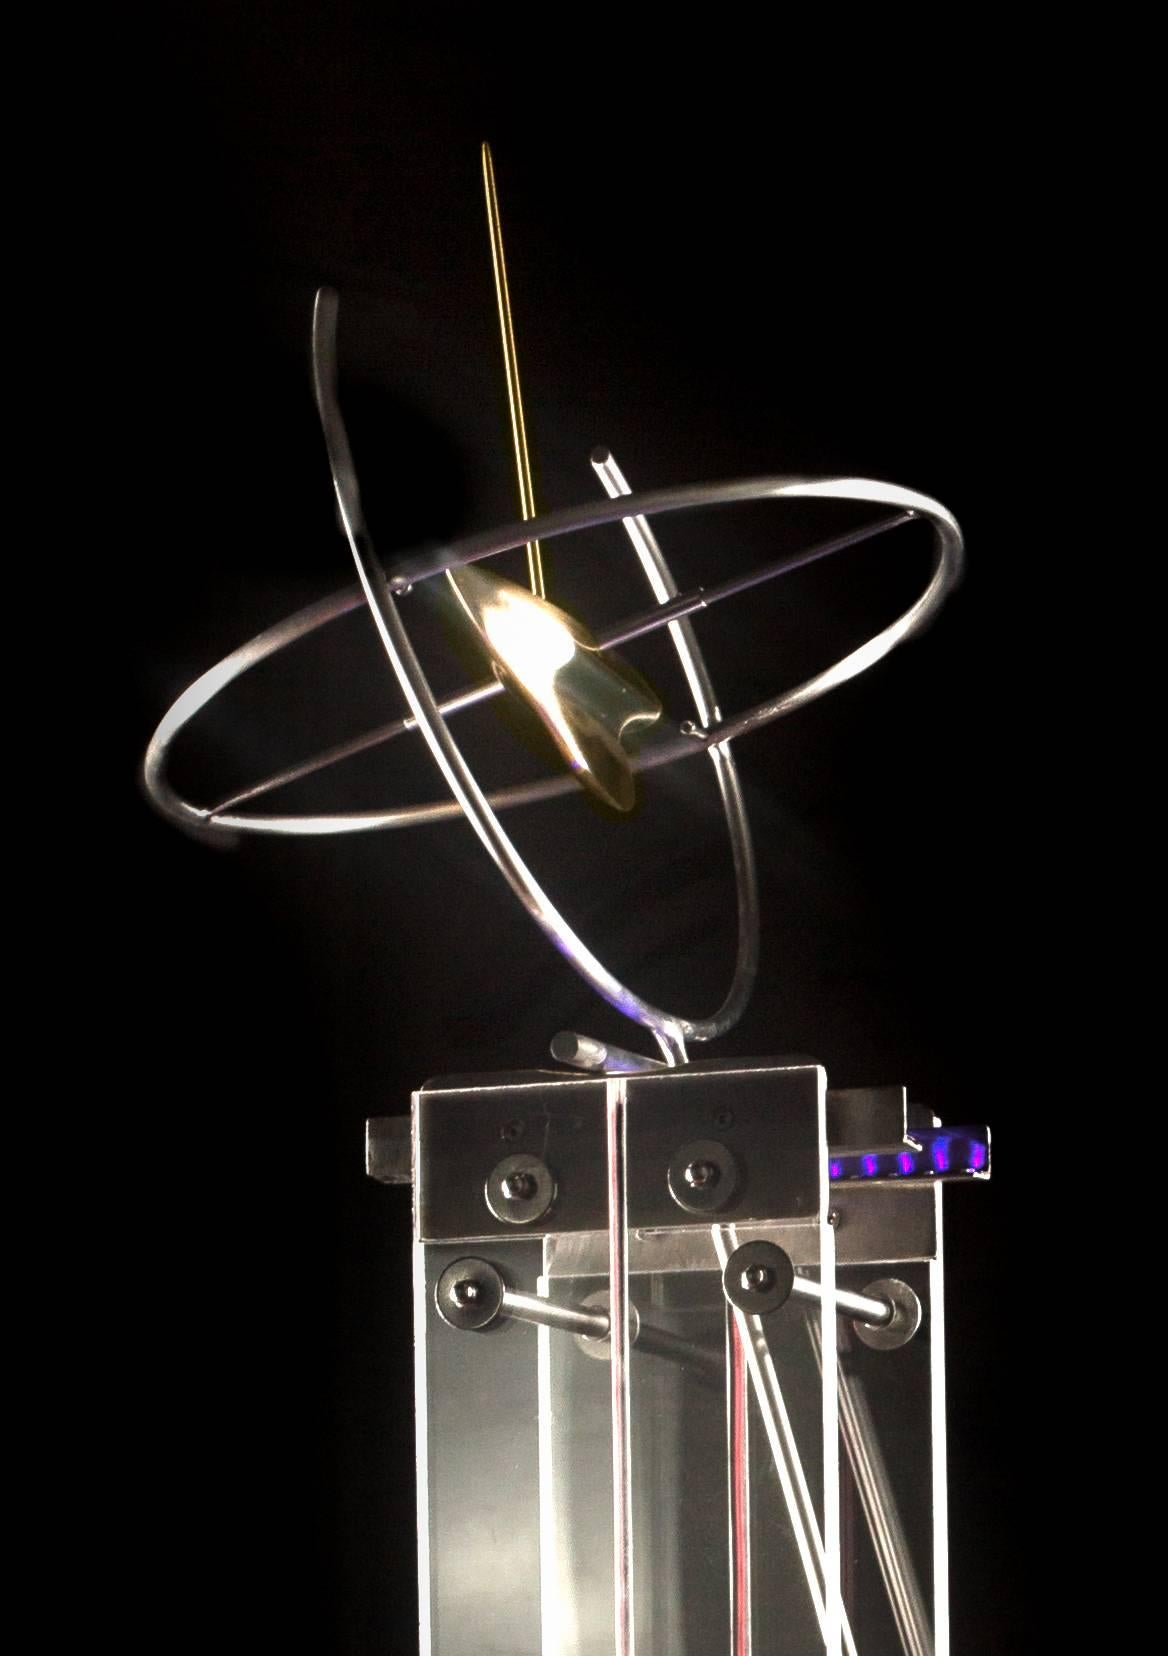 Sometimes On Time  77x16x16,  Stainless Steele, Bronze, LED lighting - Conceptual Sculpture by Robert Roesch